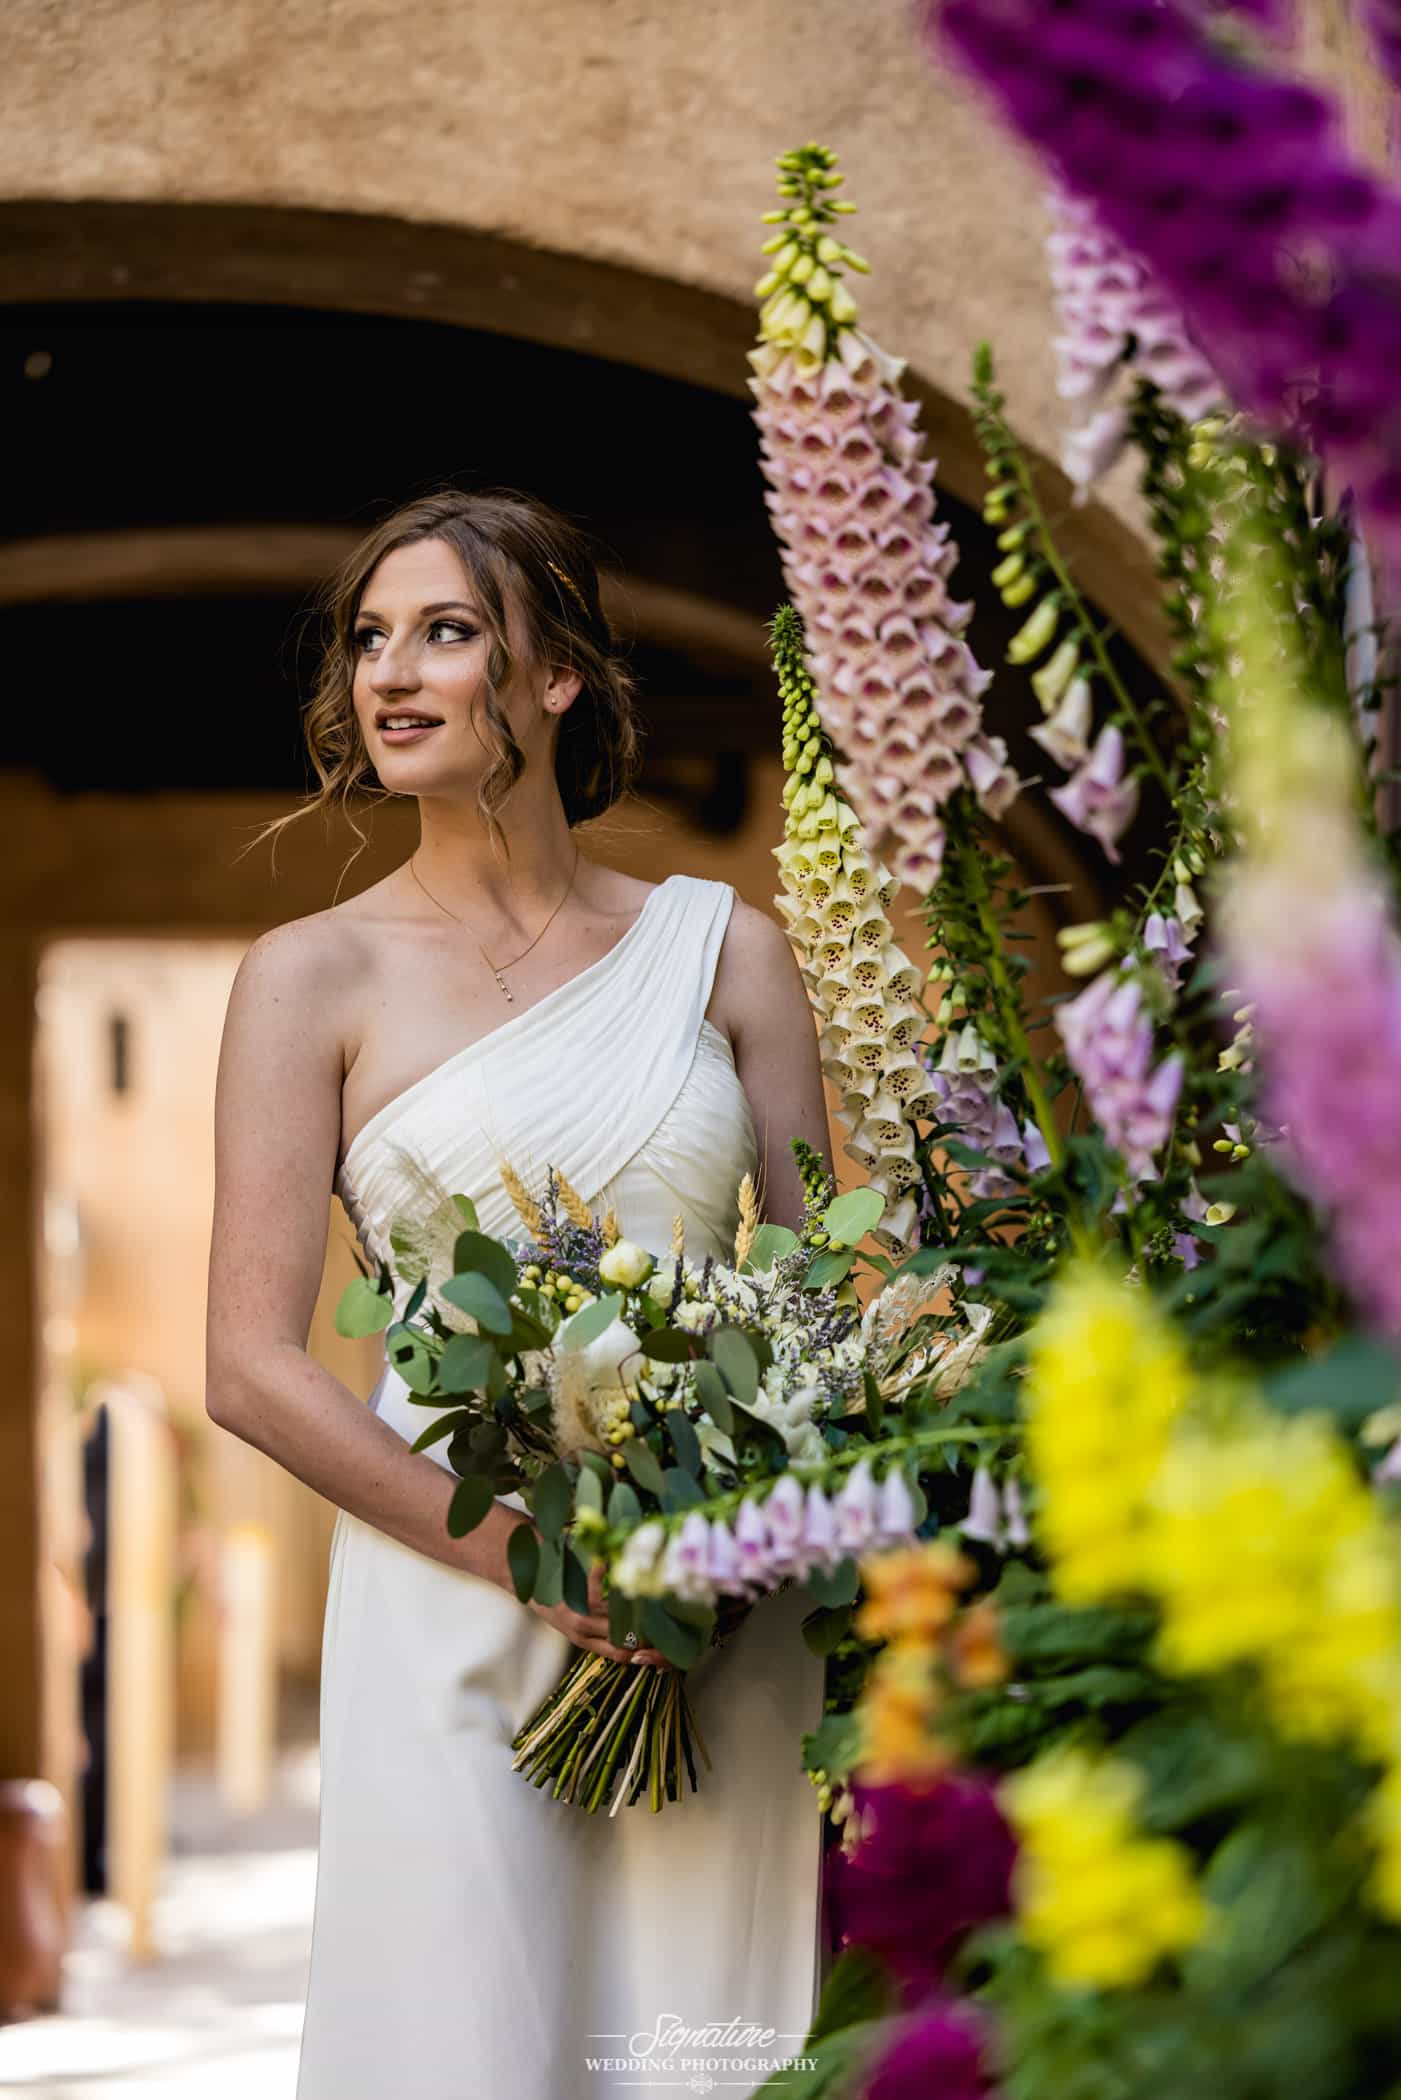 Bride looking off to side with bouquet